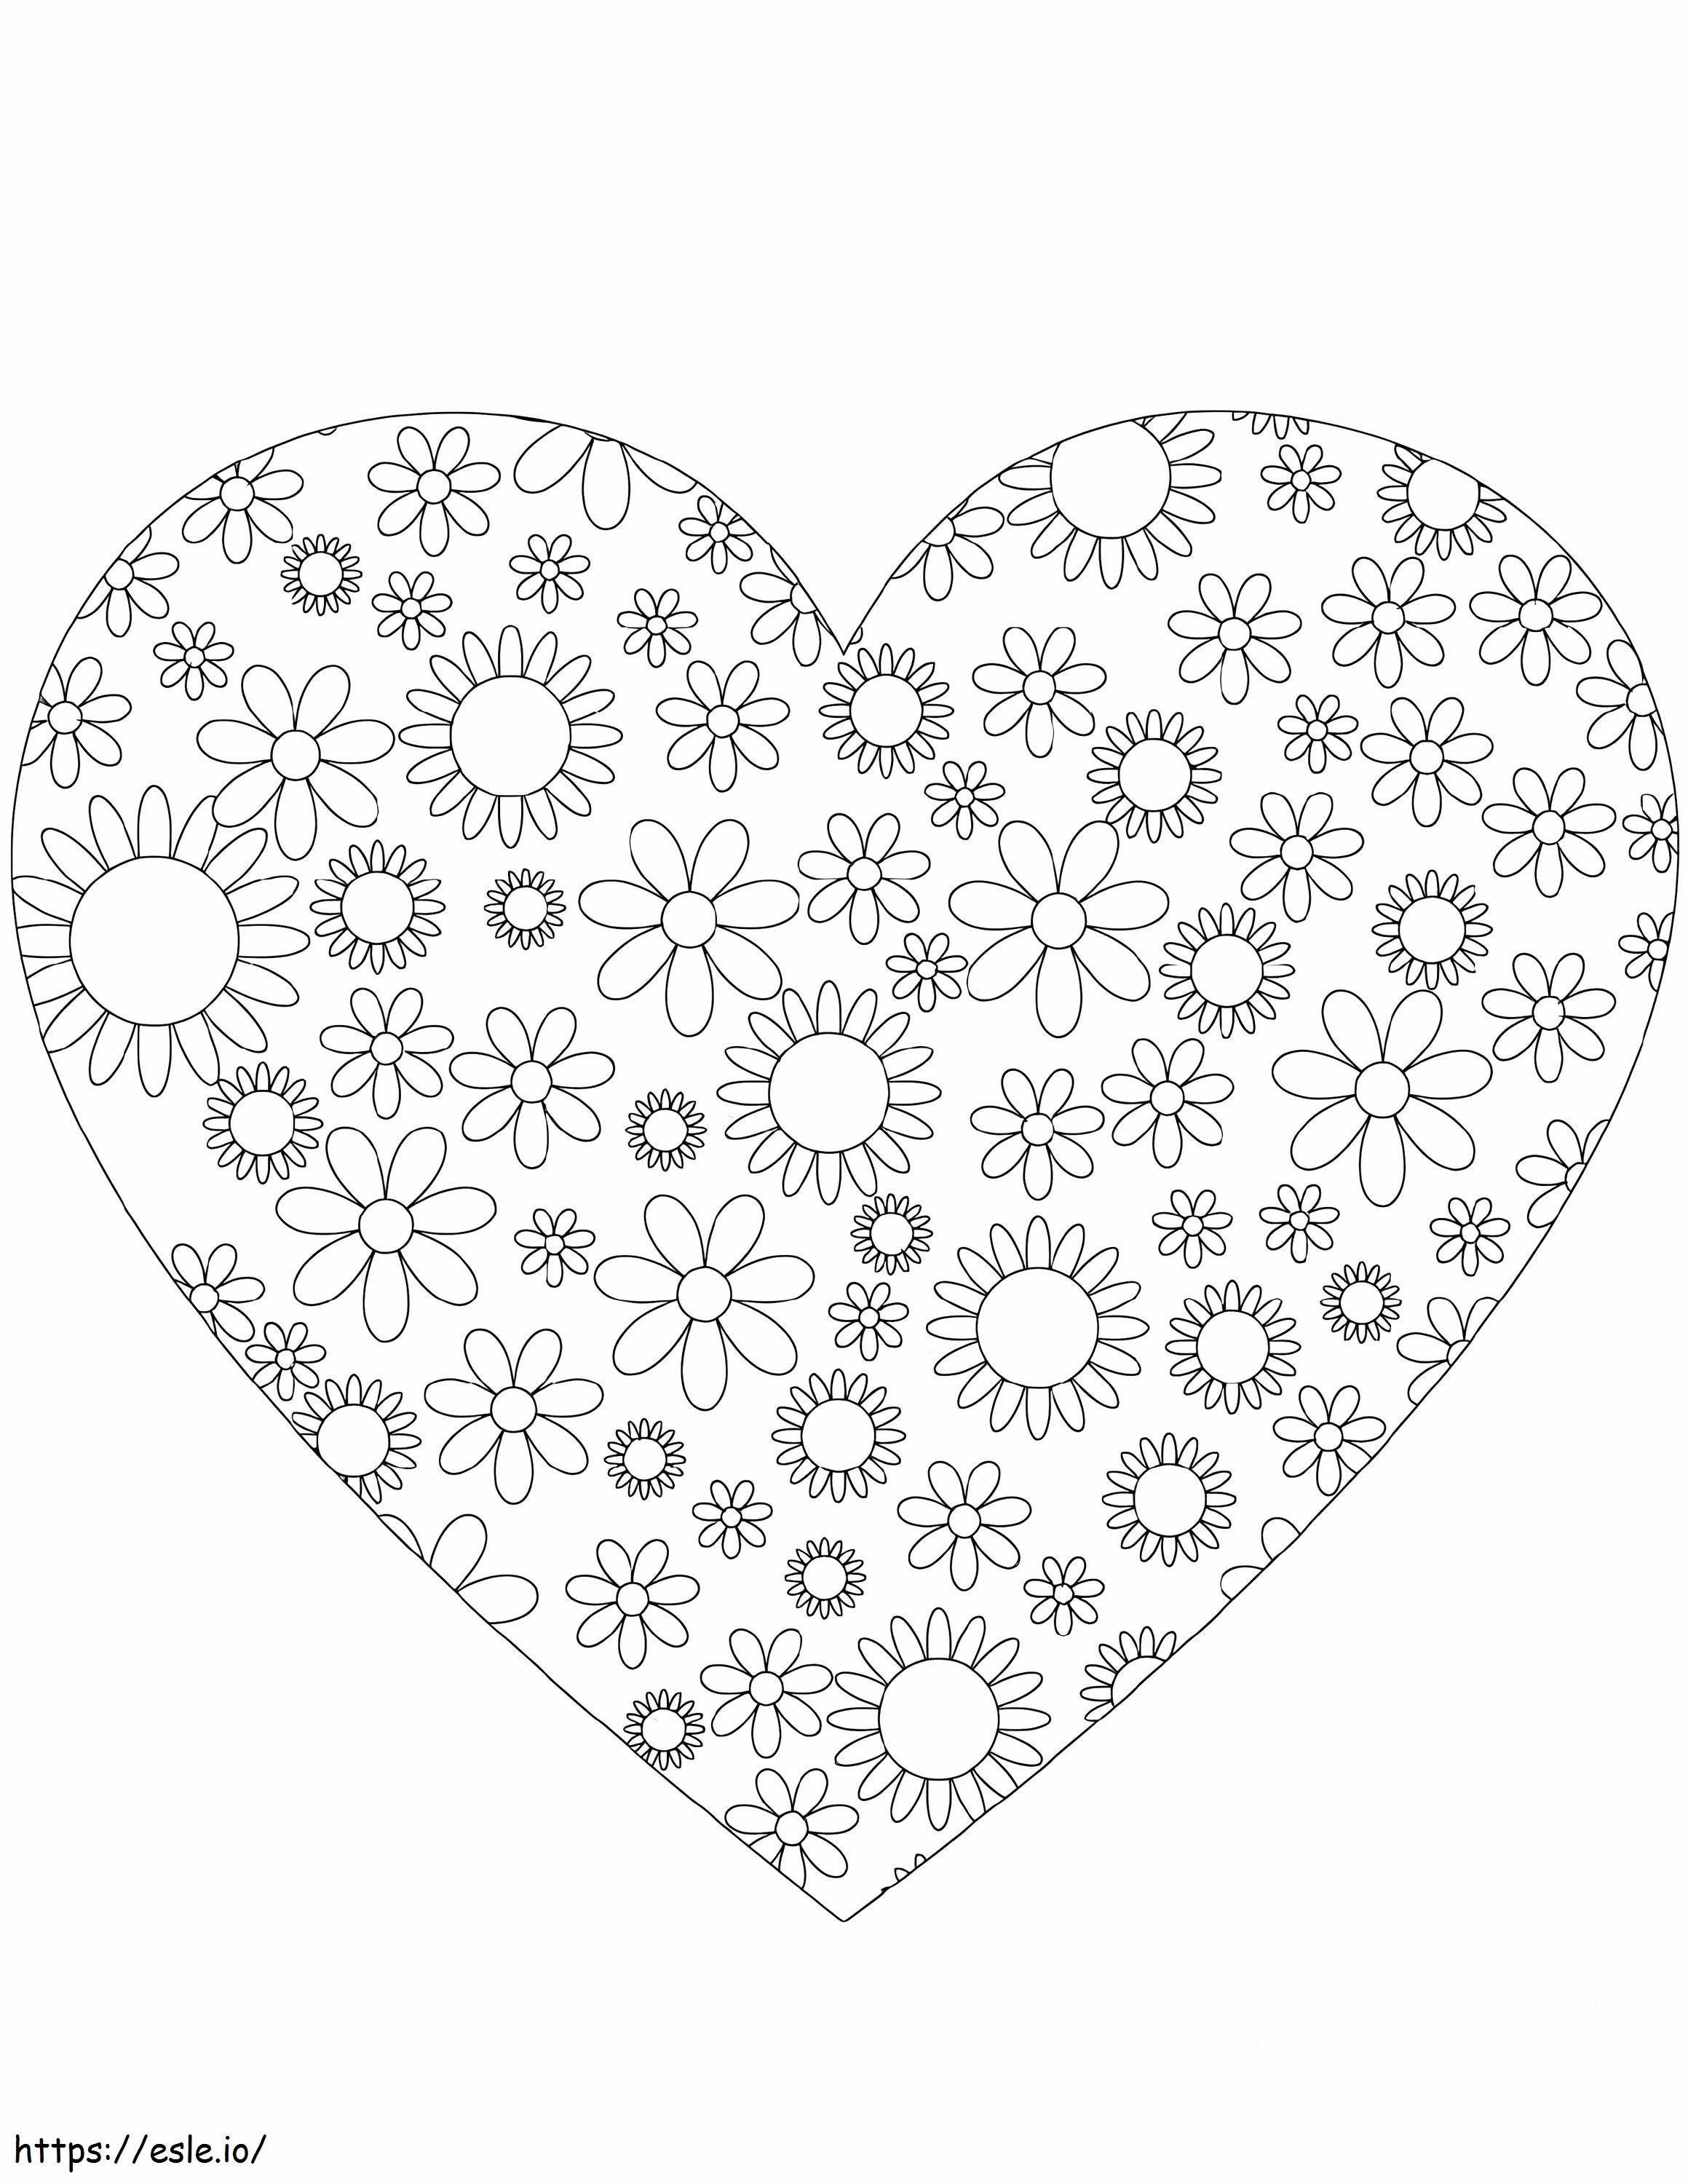 Heart 3 coloring page